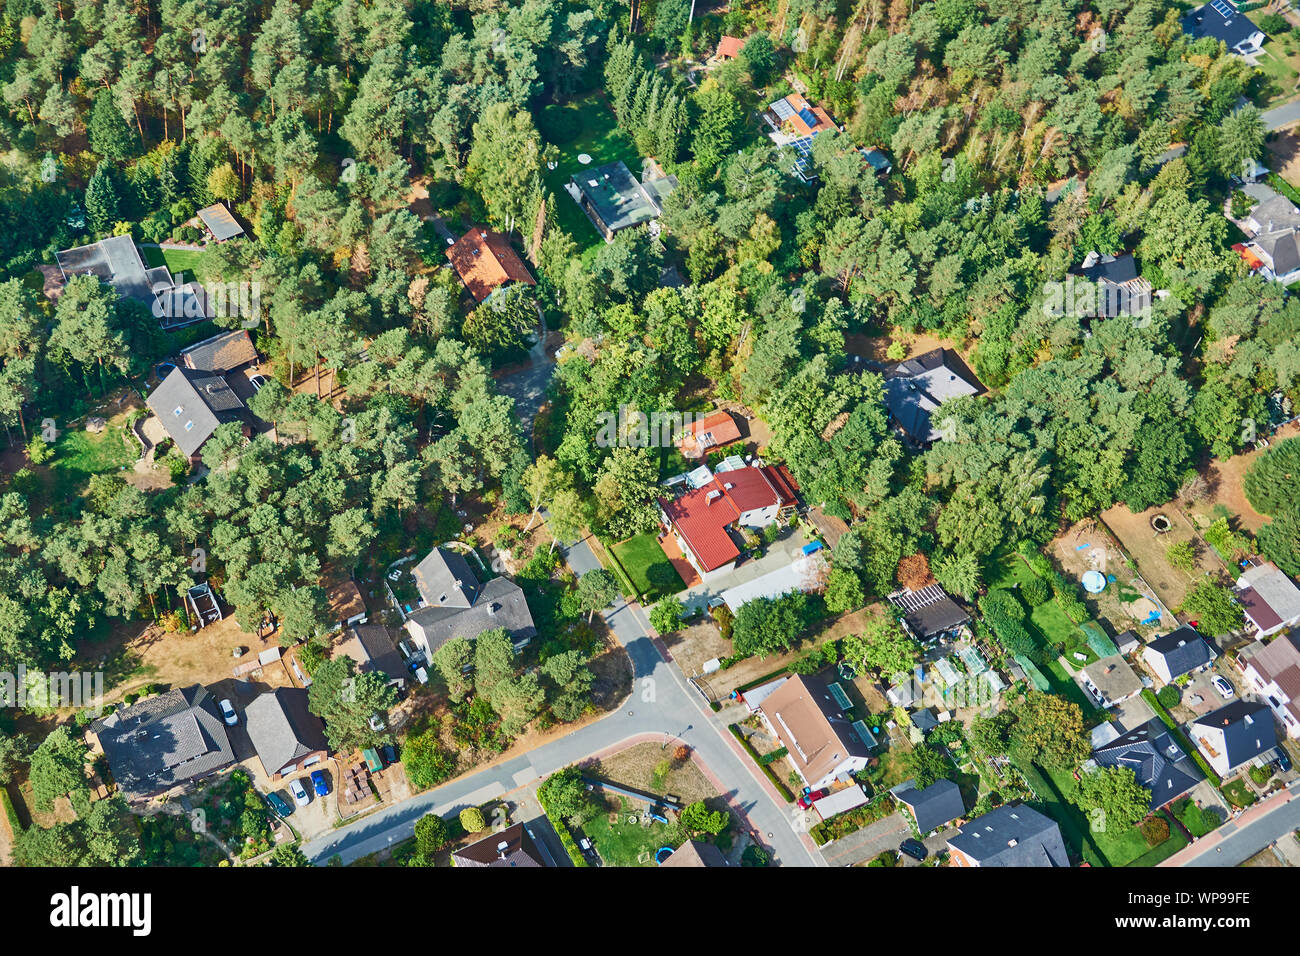 Gifhorn, Germany, September 16., 2018: Forest area sprawled by single-family houses near a large city, aerial view Stock Photo